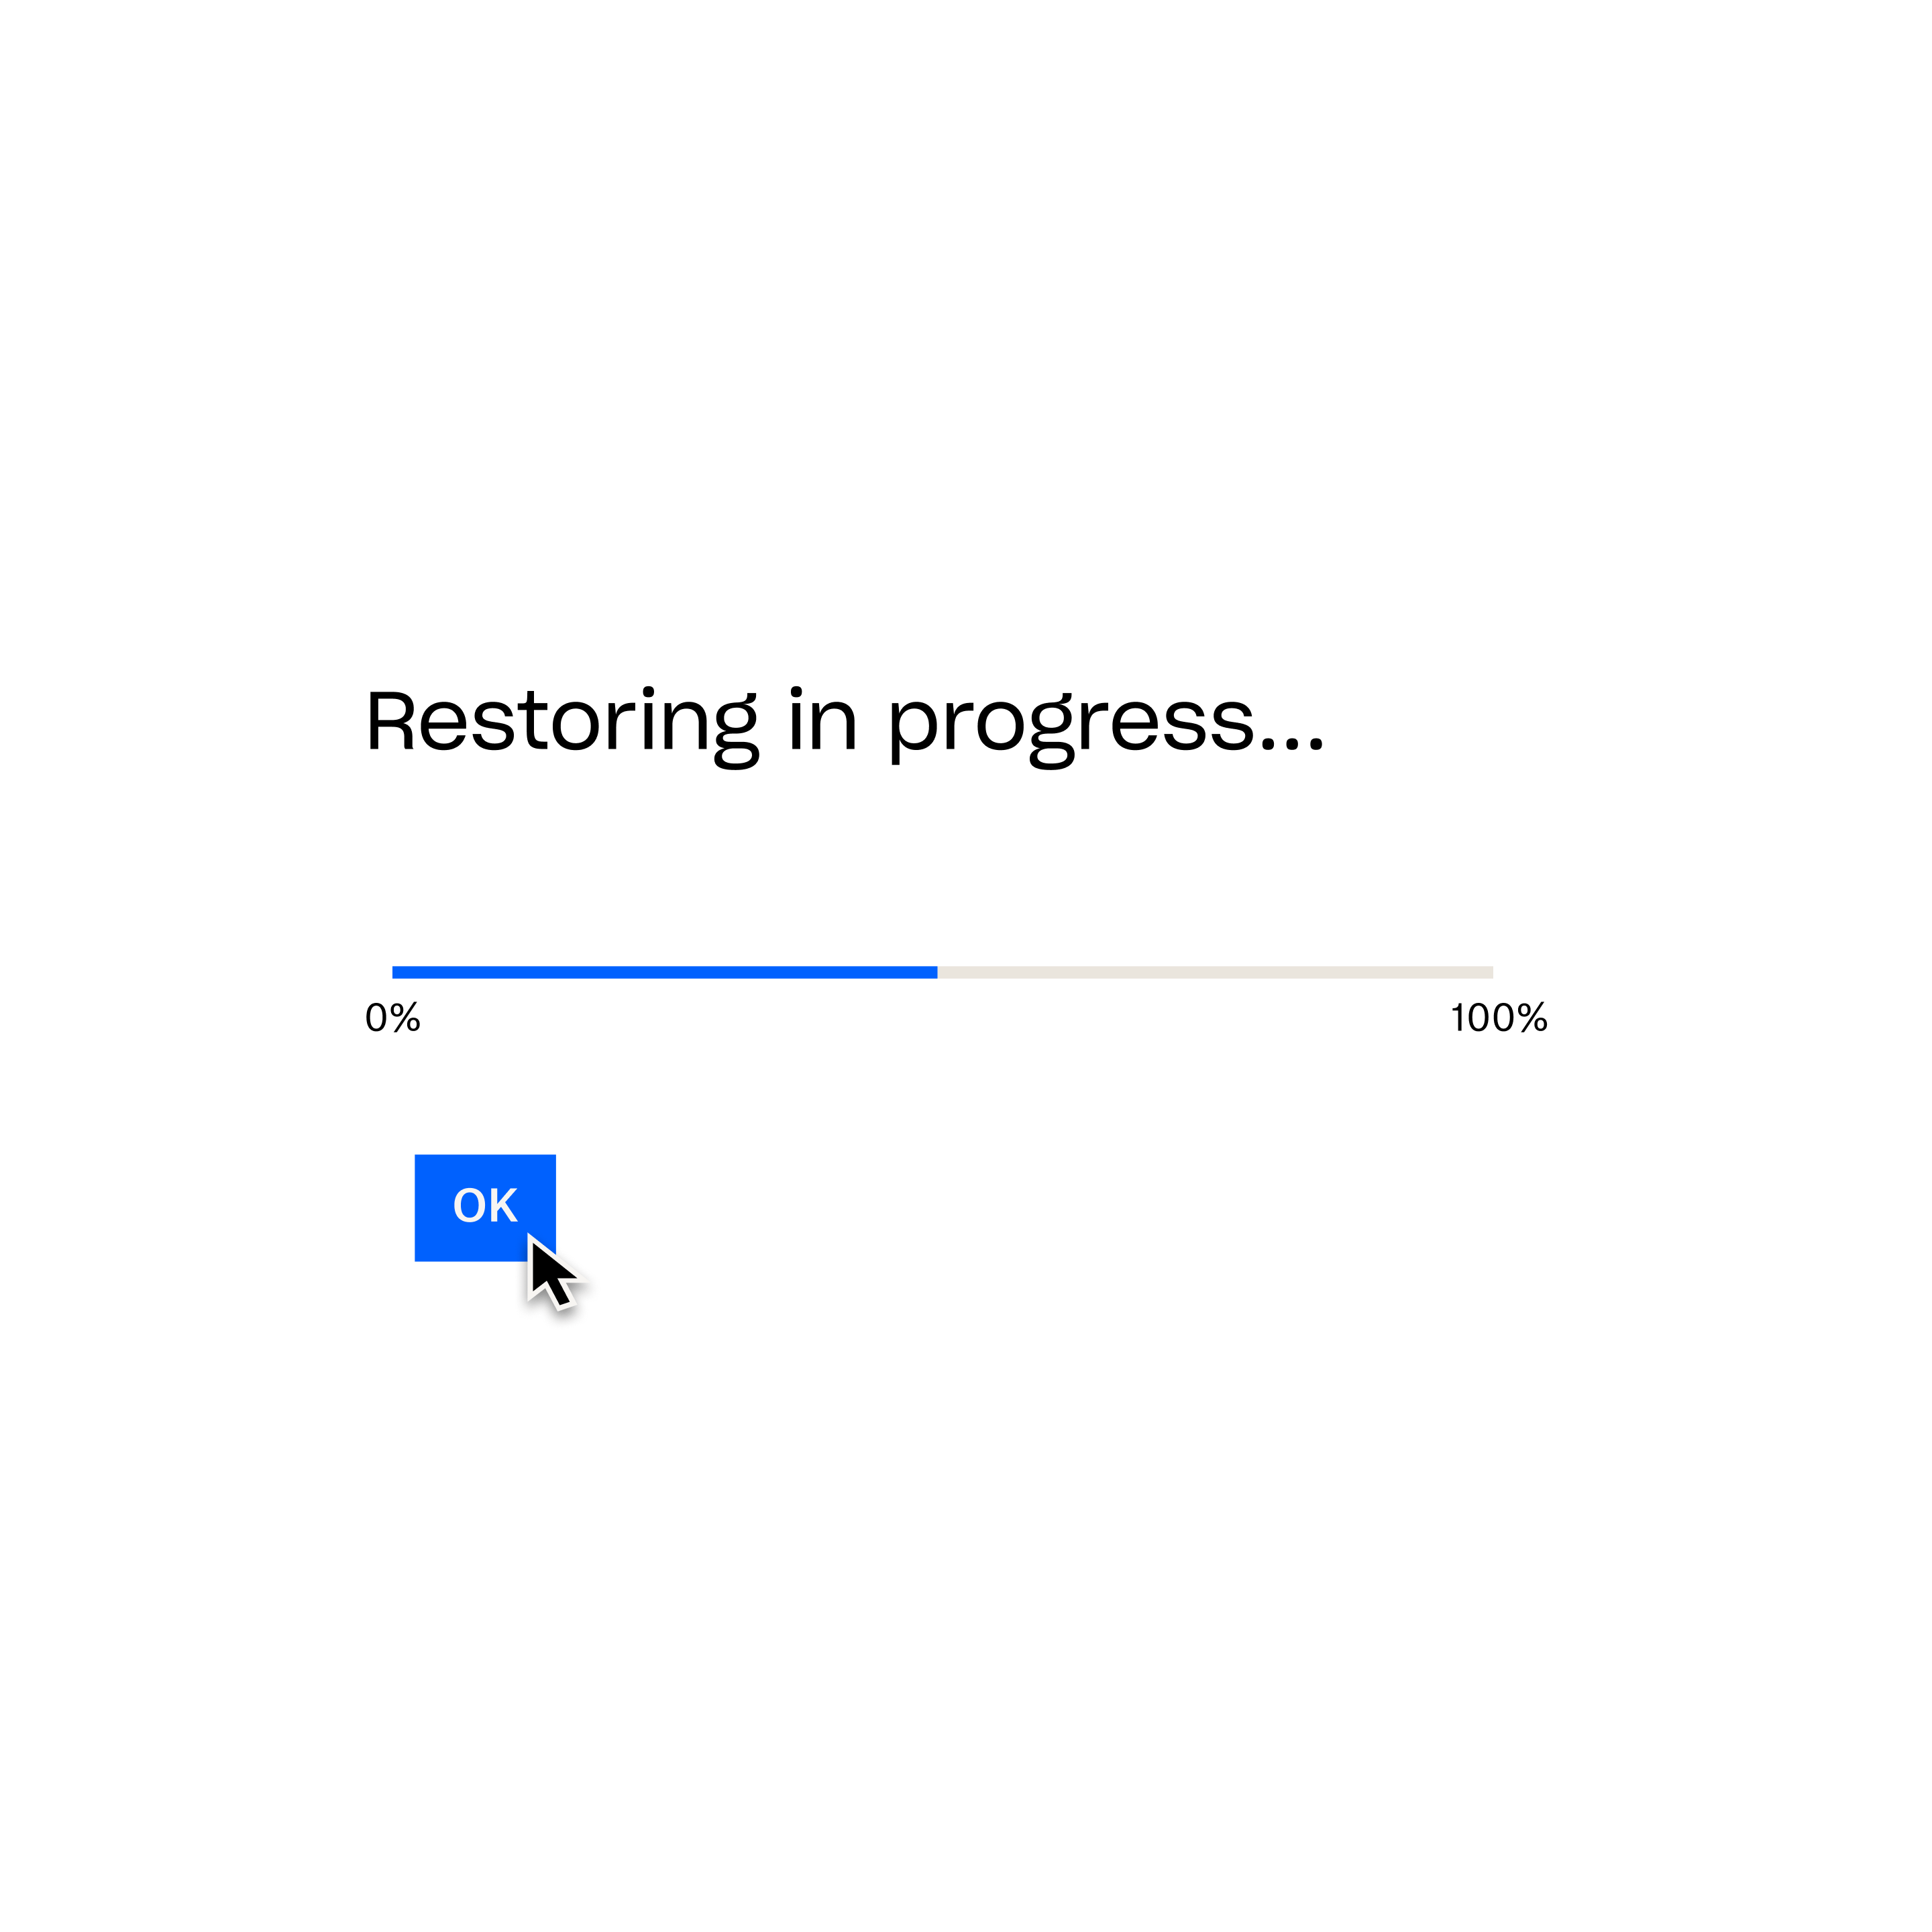 A Dropbox Backup prompt confirms “Restoring in progress…”, with a loading bar at 50% and a mouse cursor hovering over a button labelled “OK”.